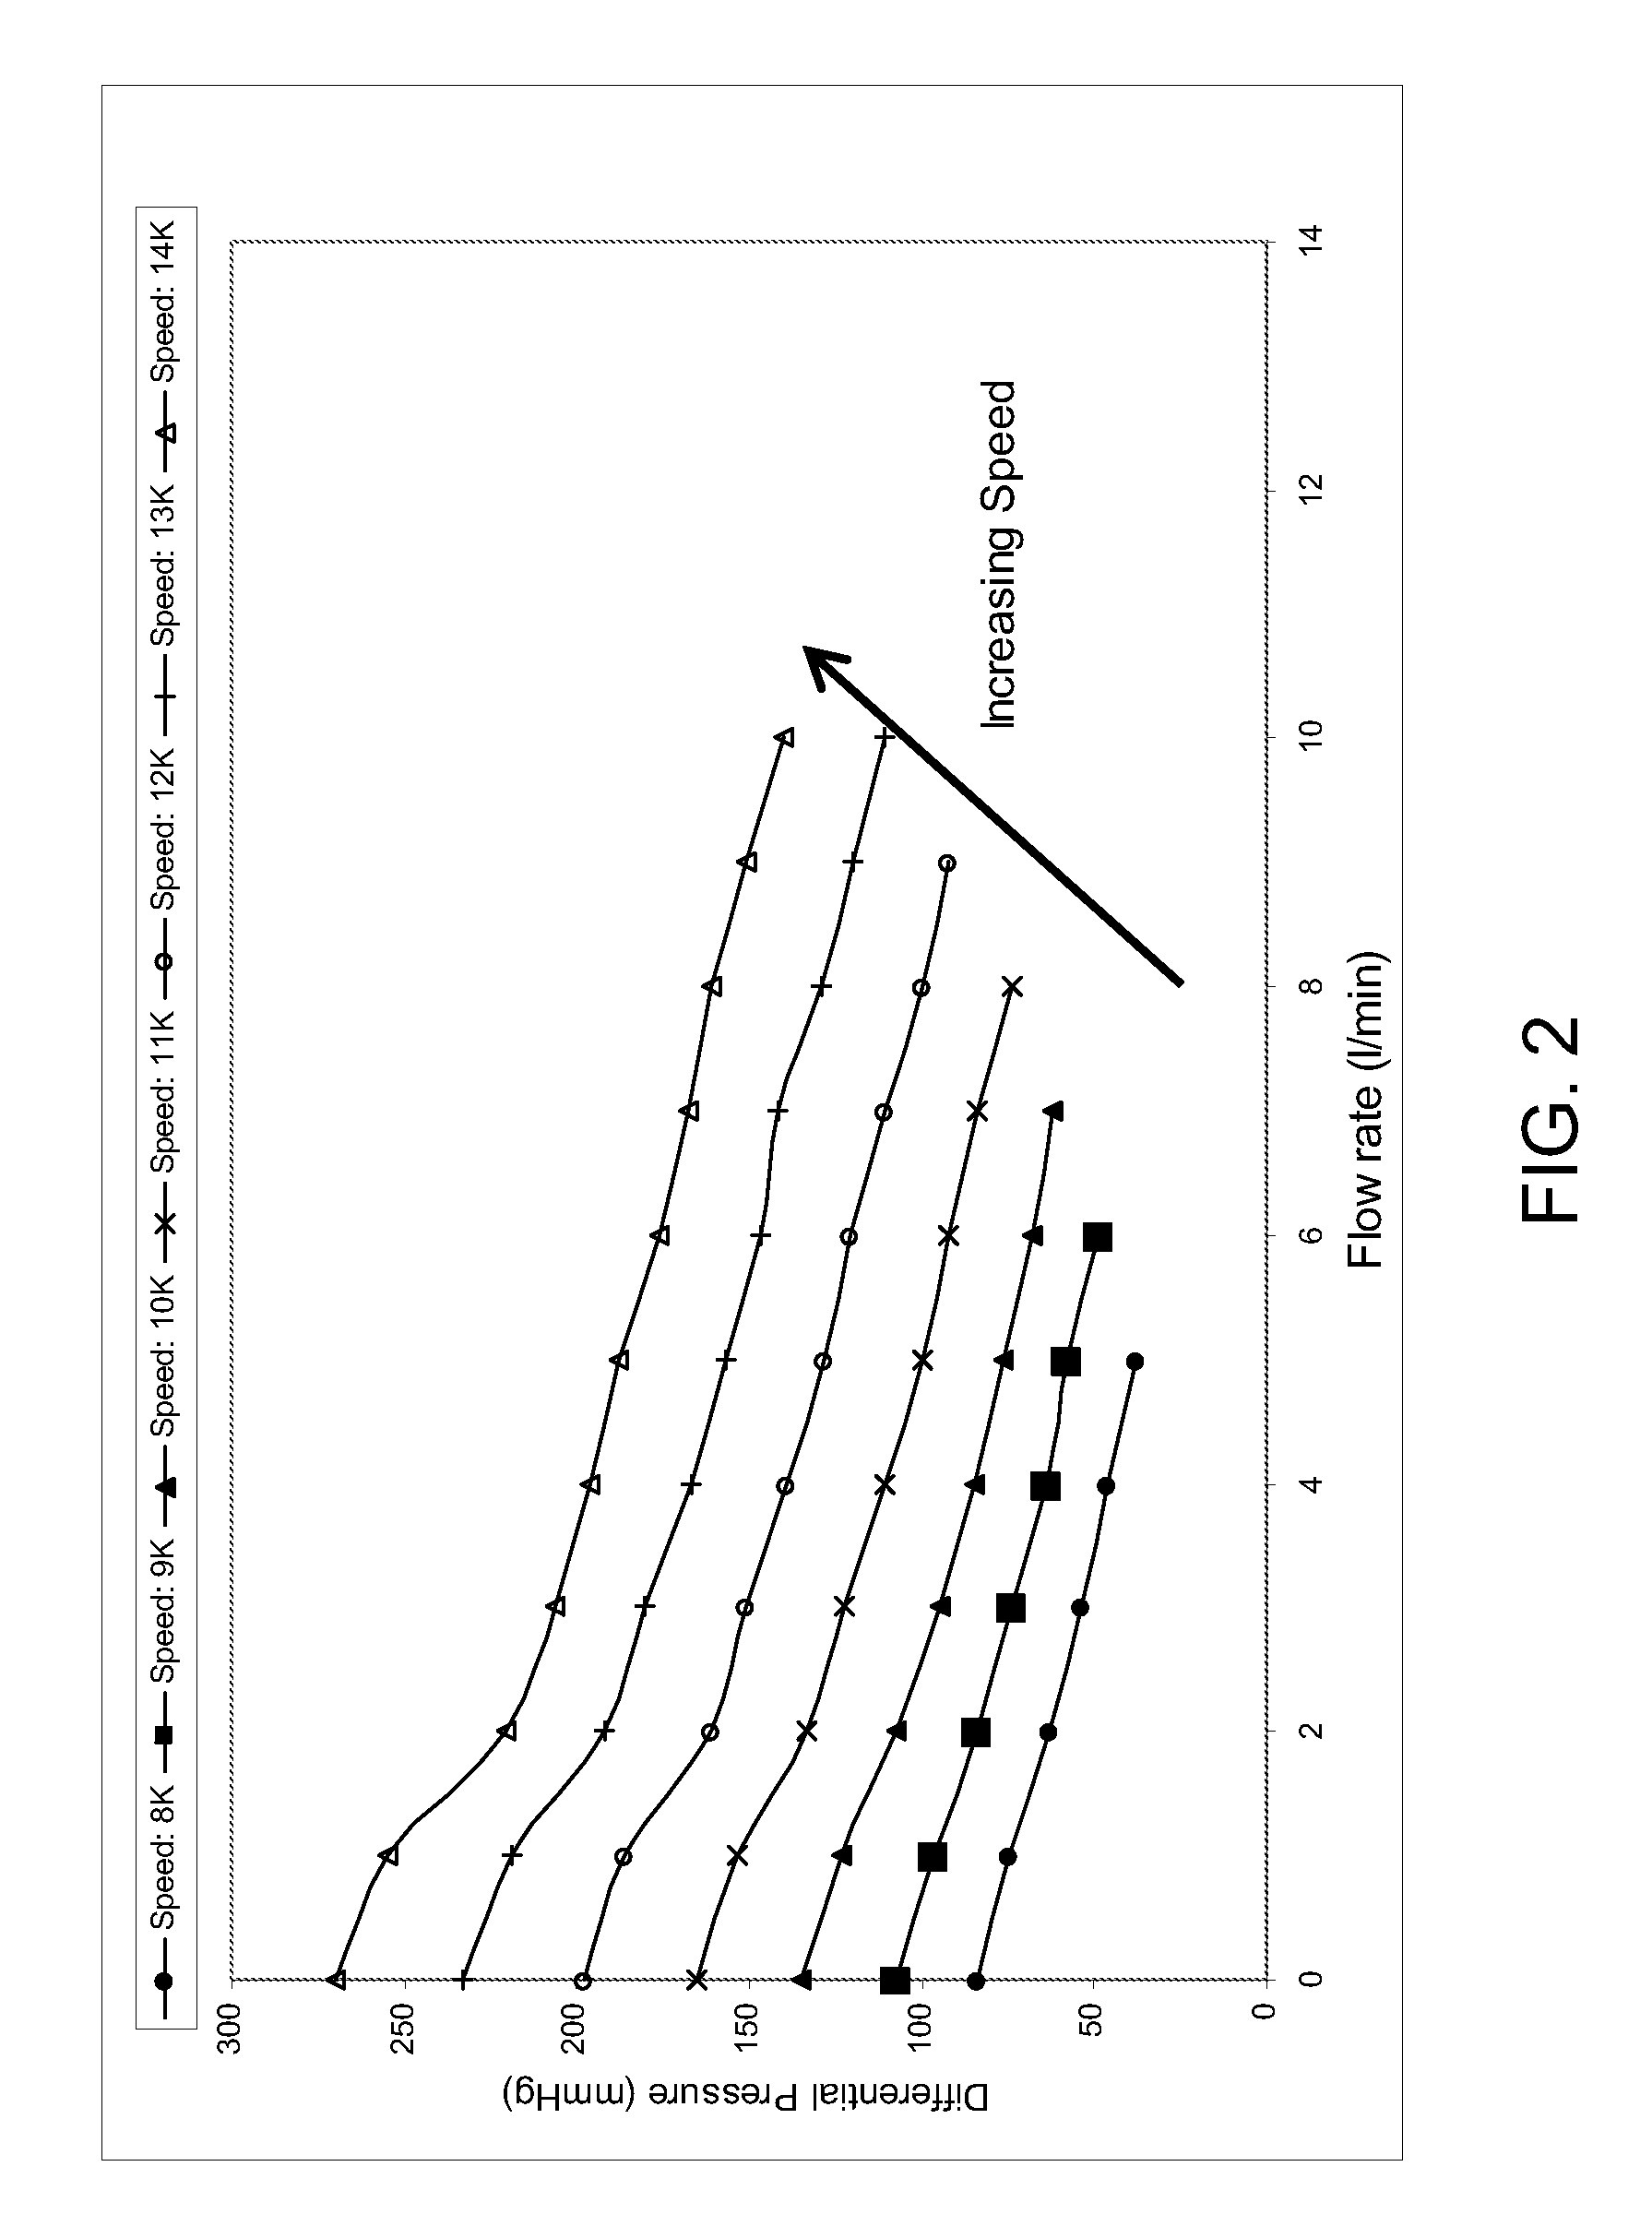 Apparatus and method for modifying pressure-flow characteristics of a pump